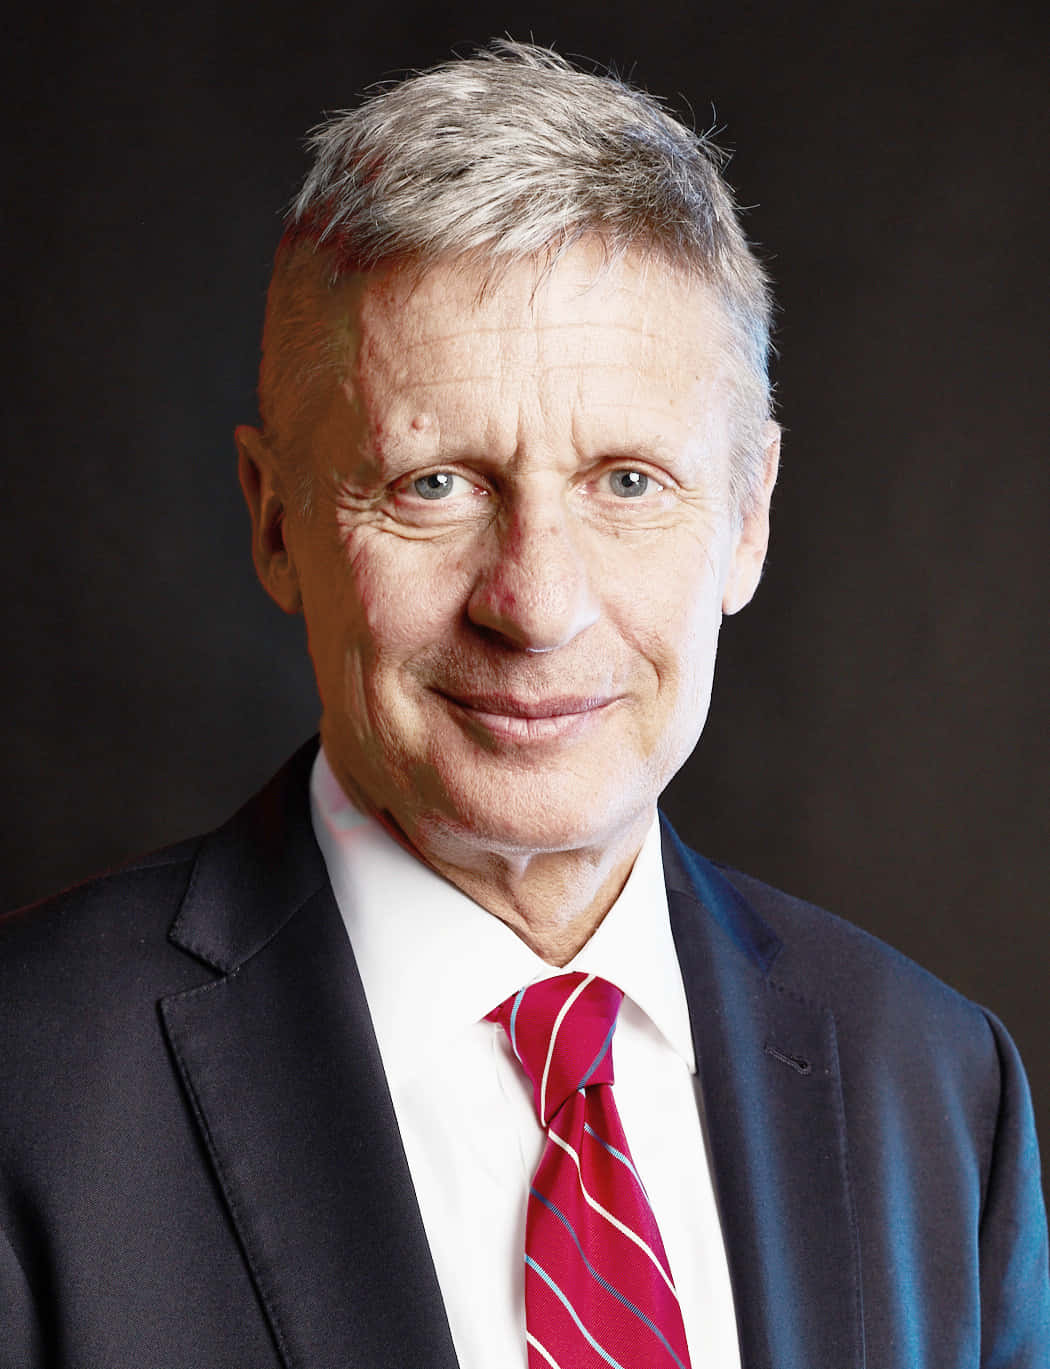 Gary Johnson Outfitted in a Black Suit Wallpaper